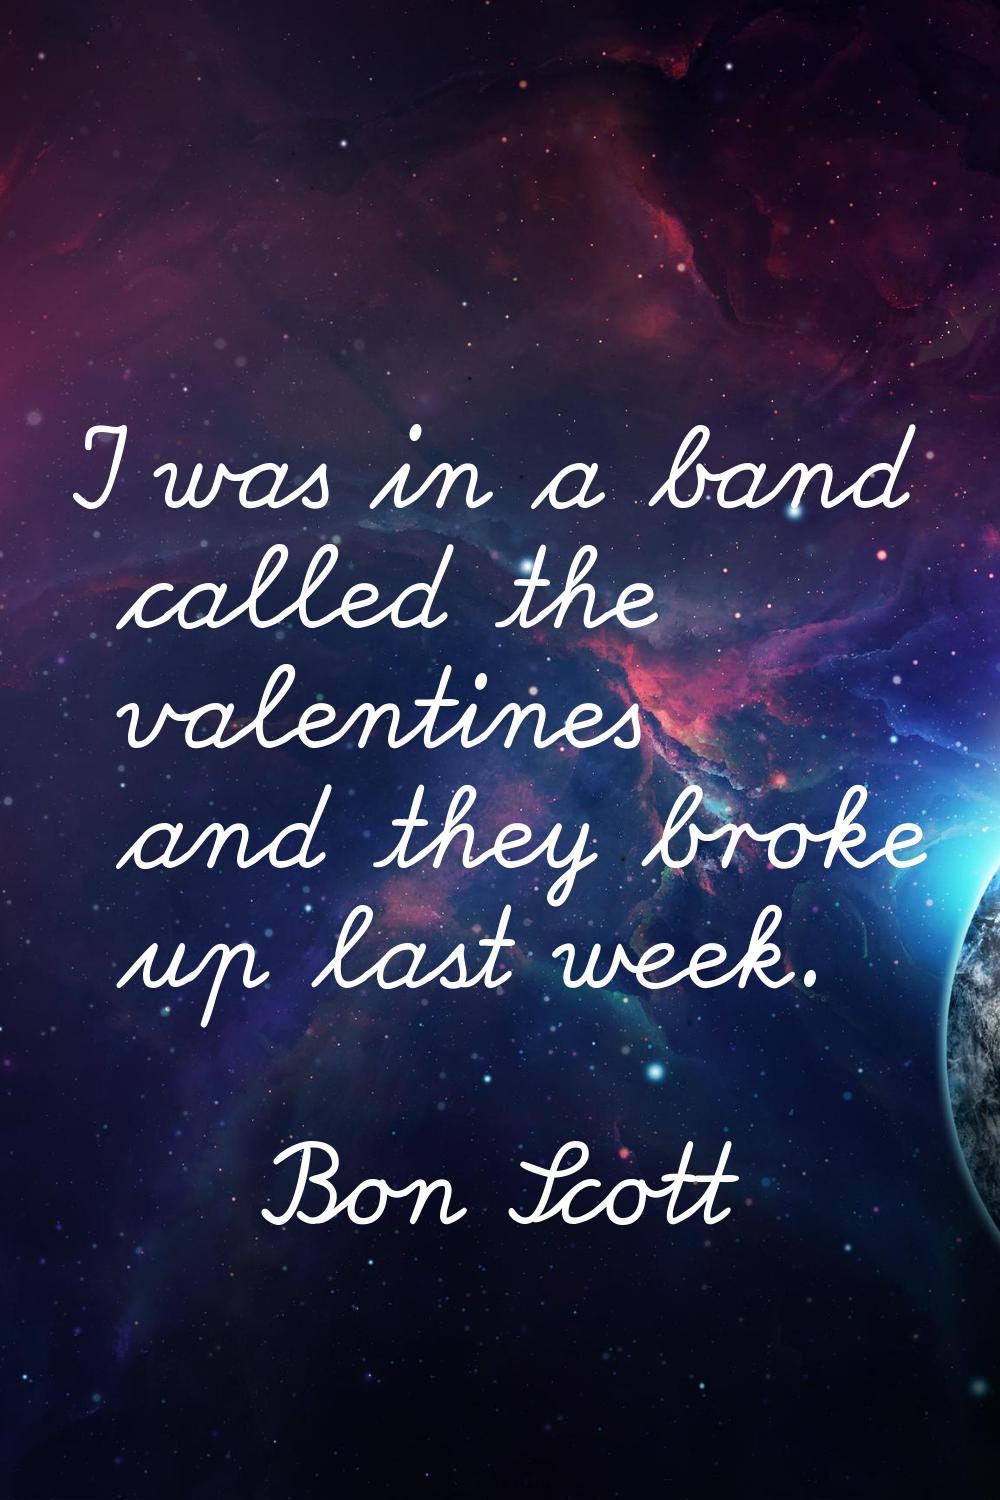 I was in a band called the valentines and they broke up last week.